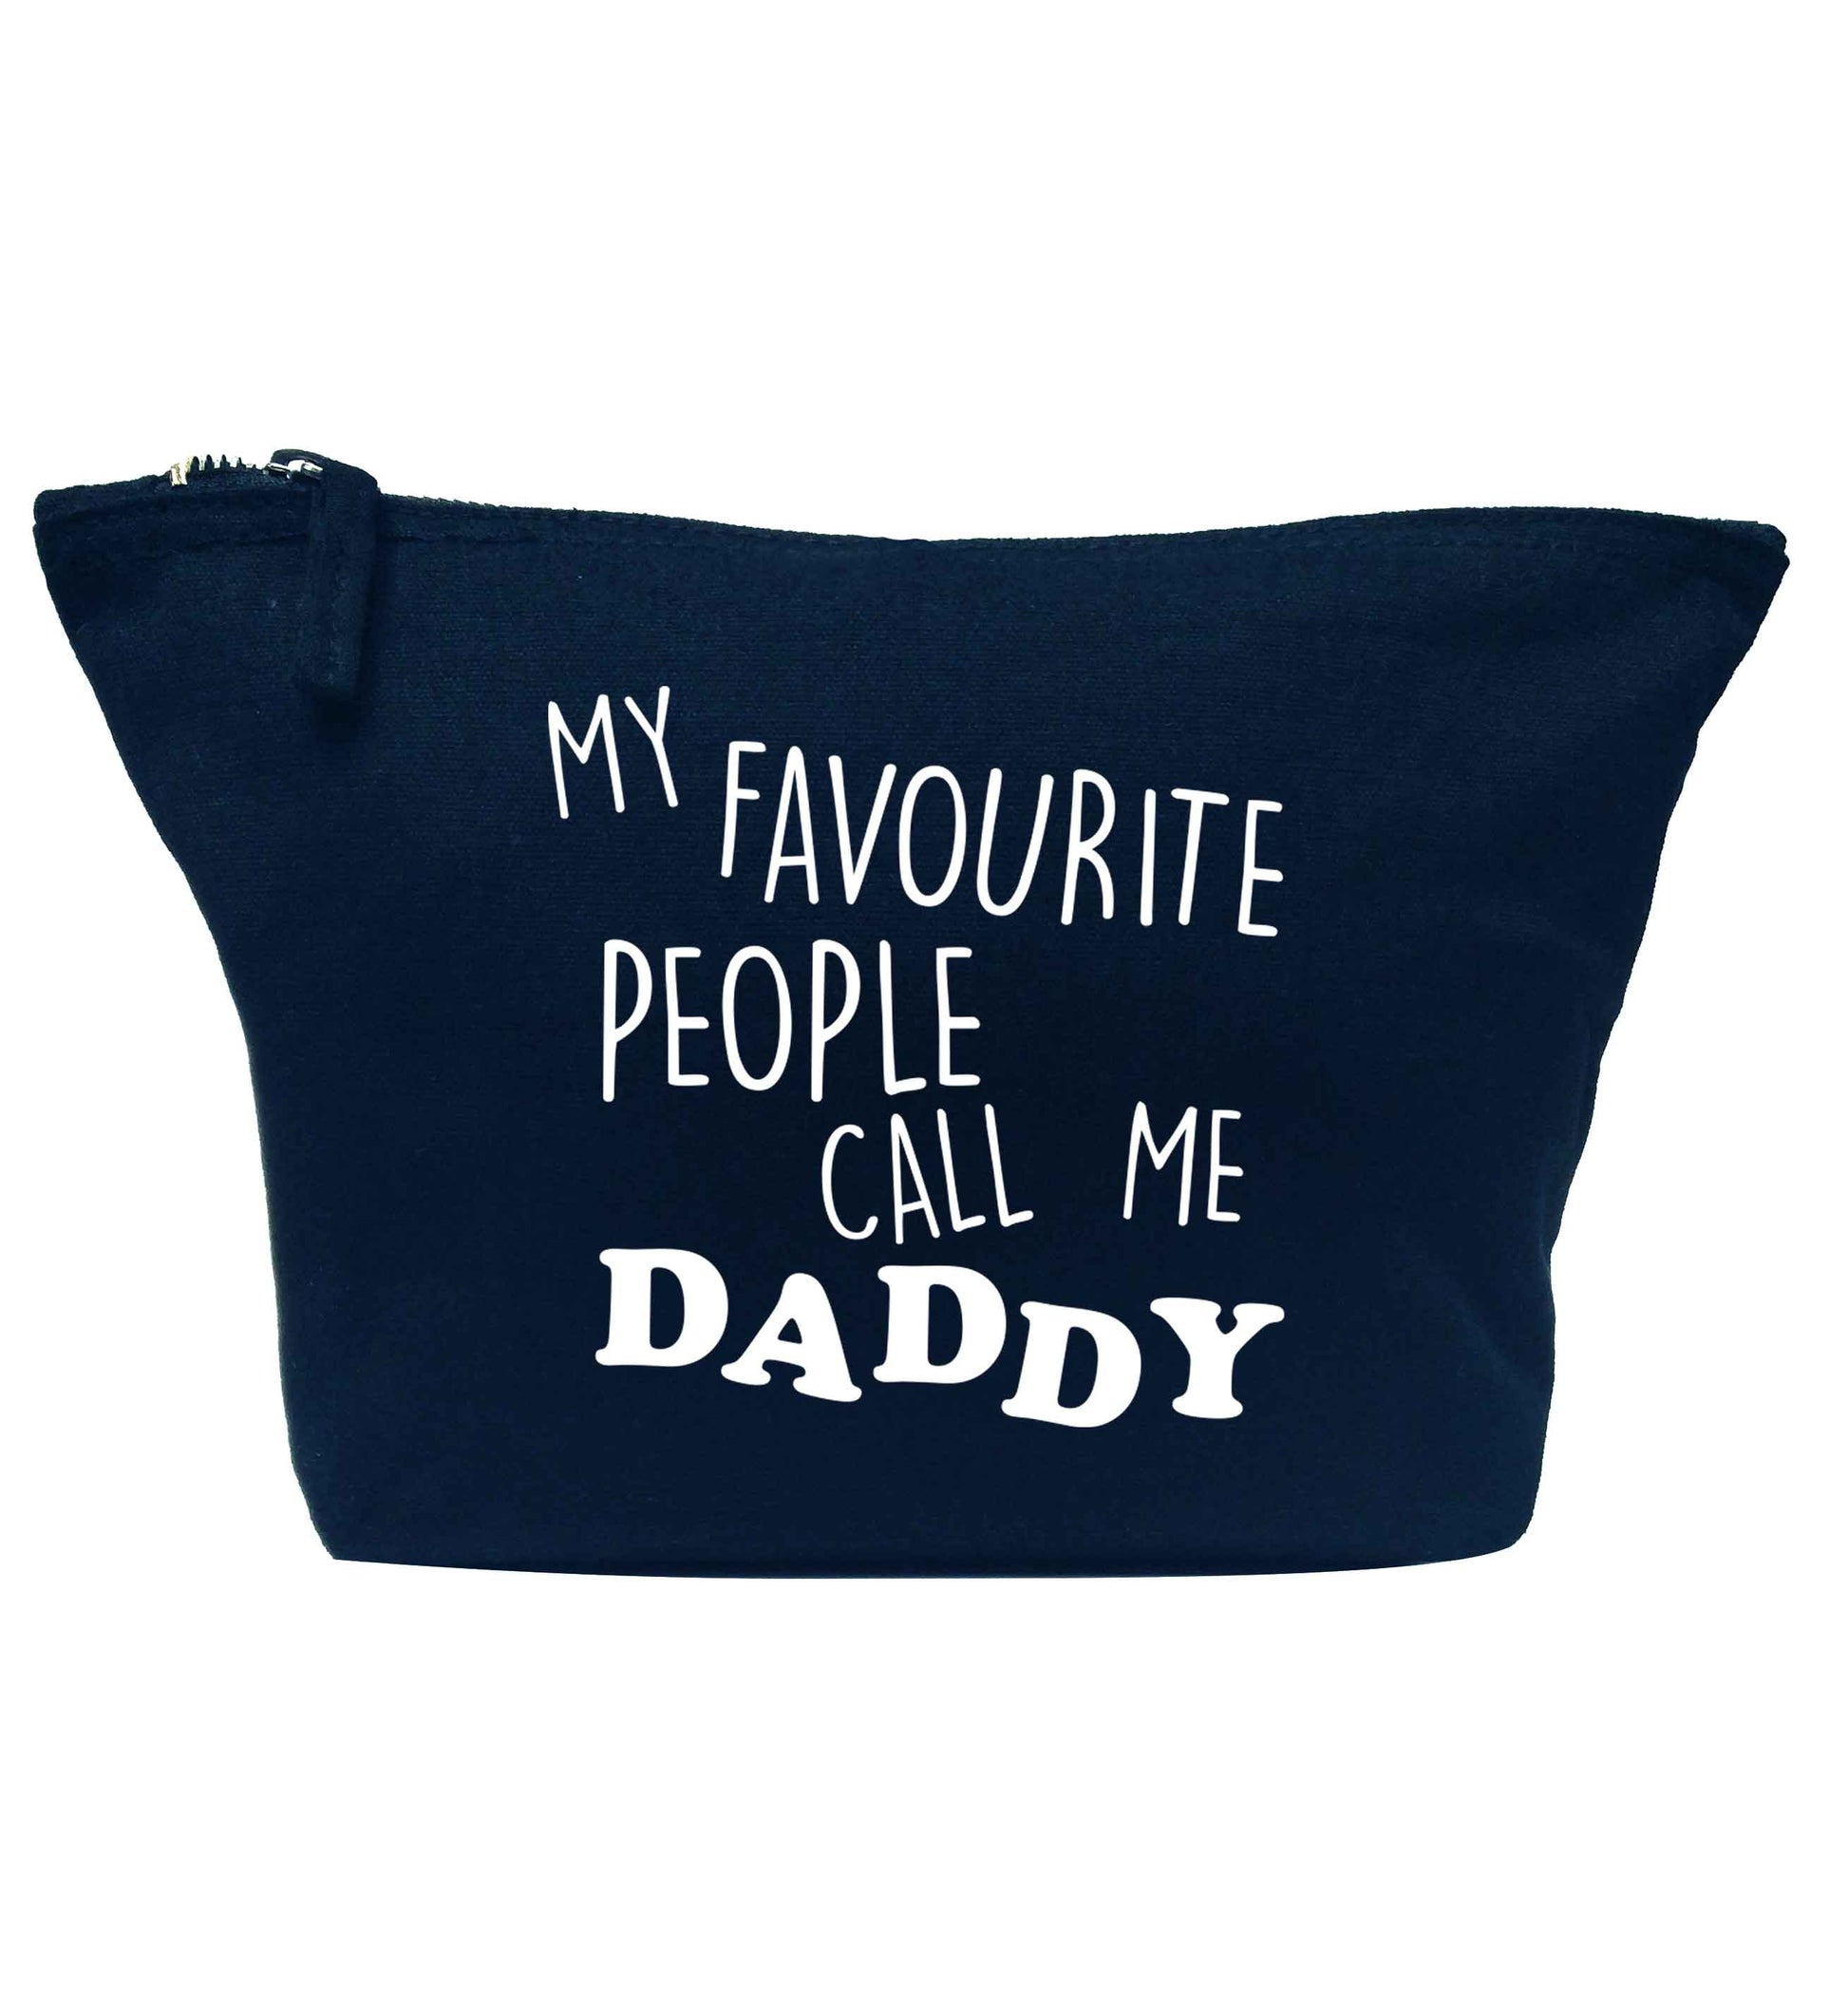 My favourite people call me daddy navy makeup bag